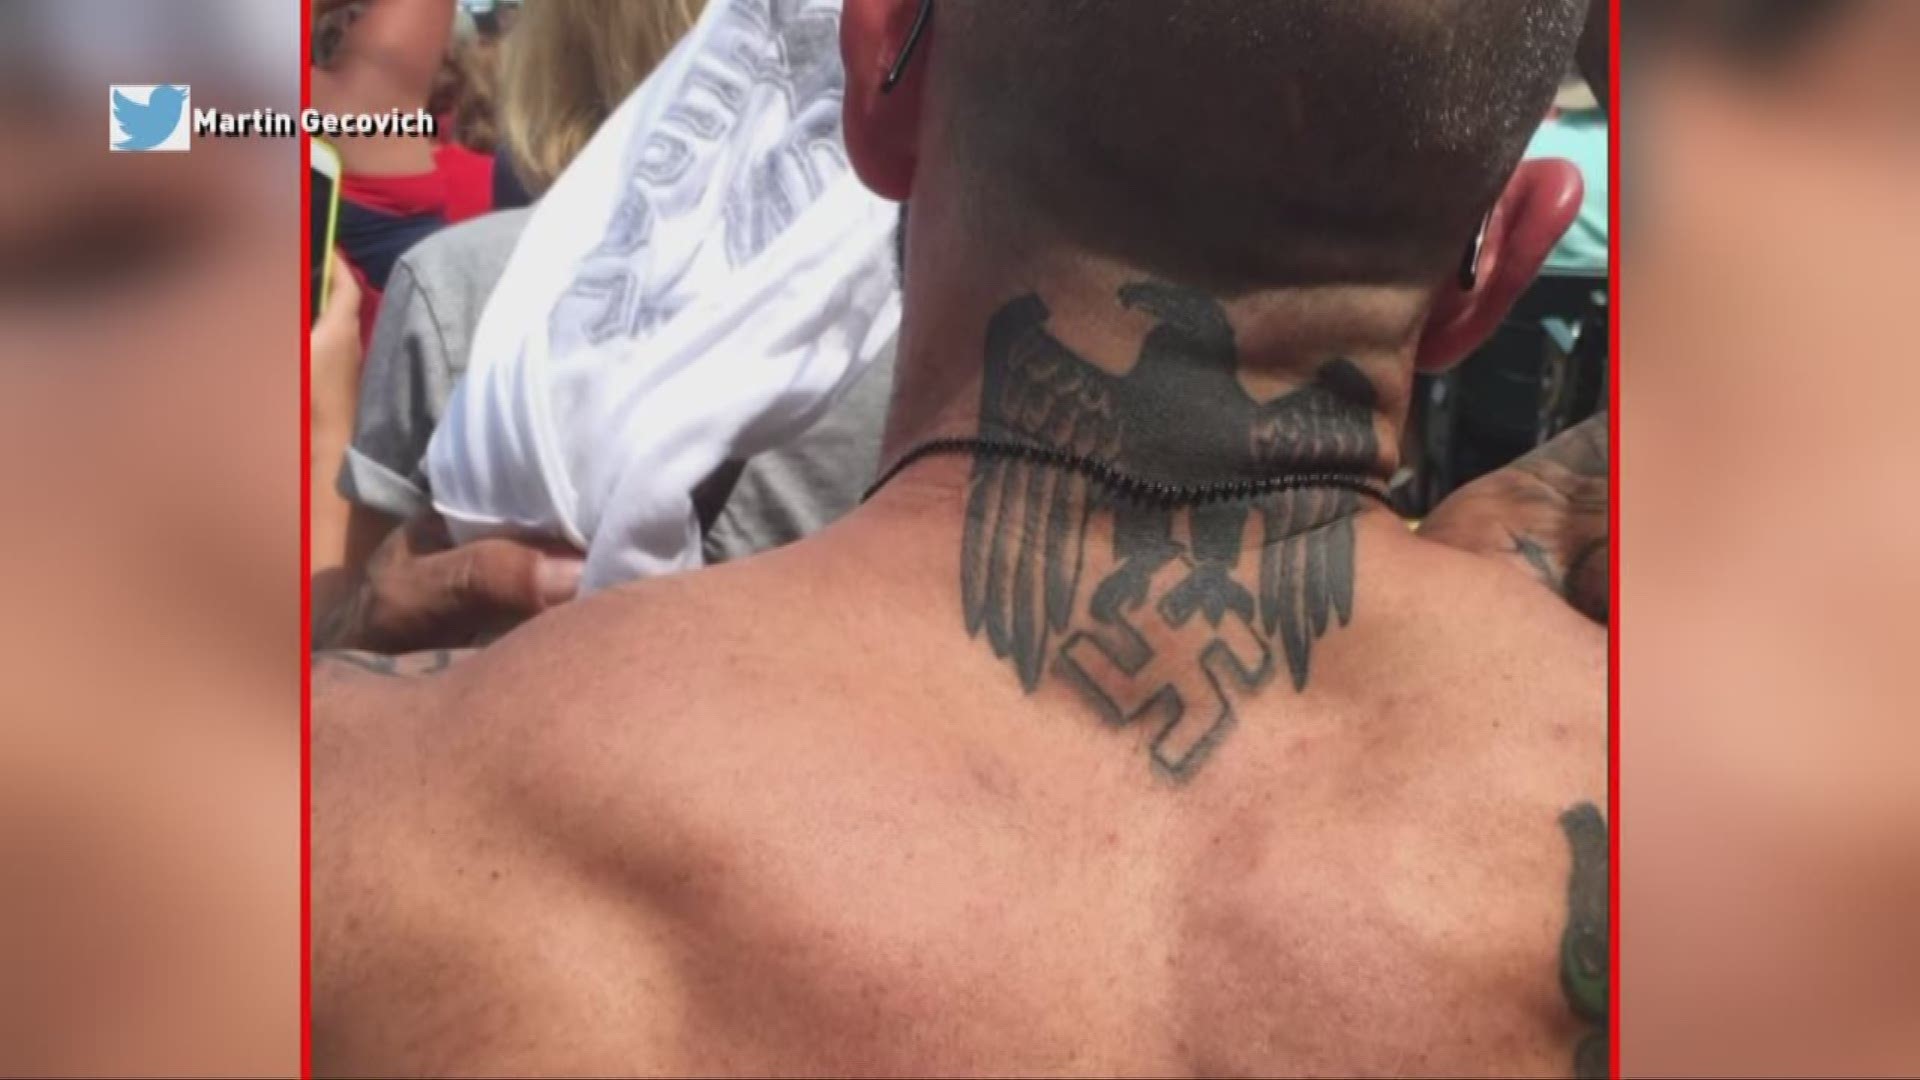 A Cleveland Indians' fan was upset after being seated behind another fan with controversial tattoos during Sunday's game against the Blue Jay's .